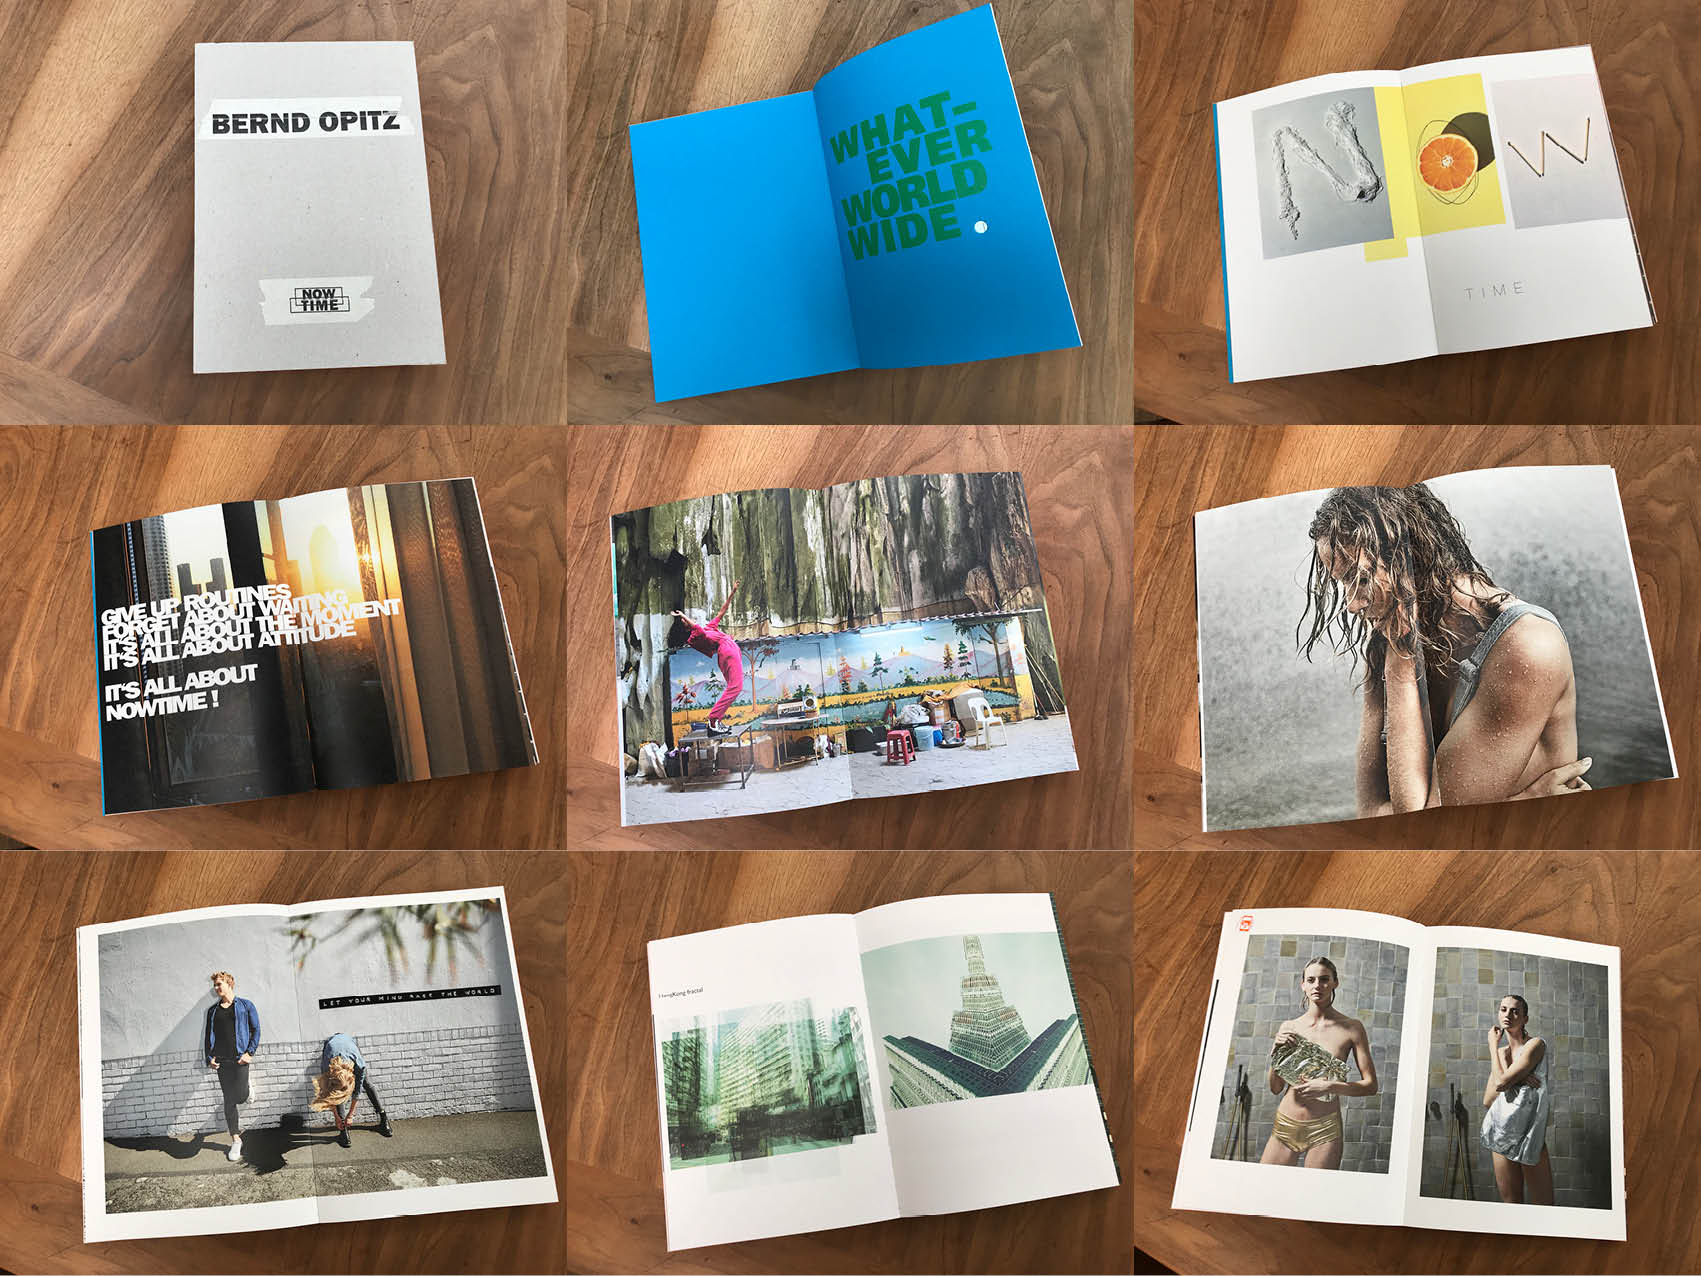 pictures of the creative book nowtime by Bernd Opitz